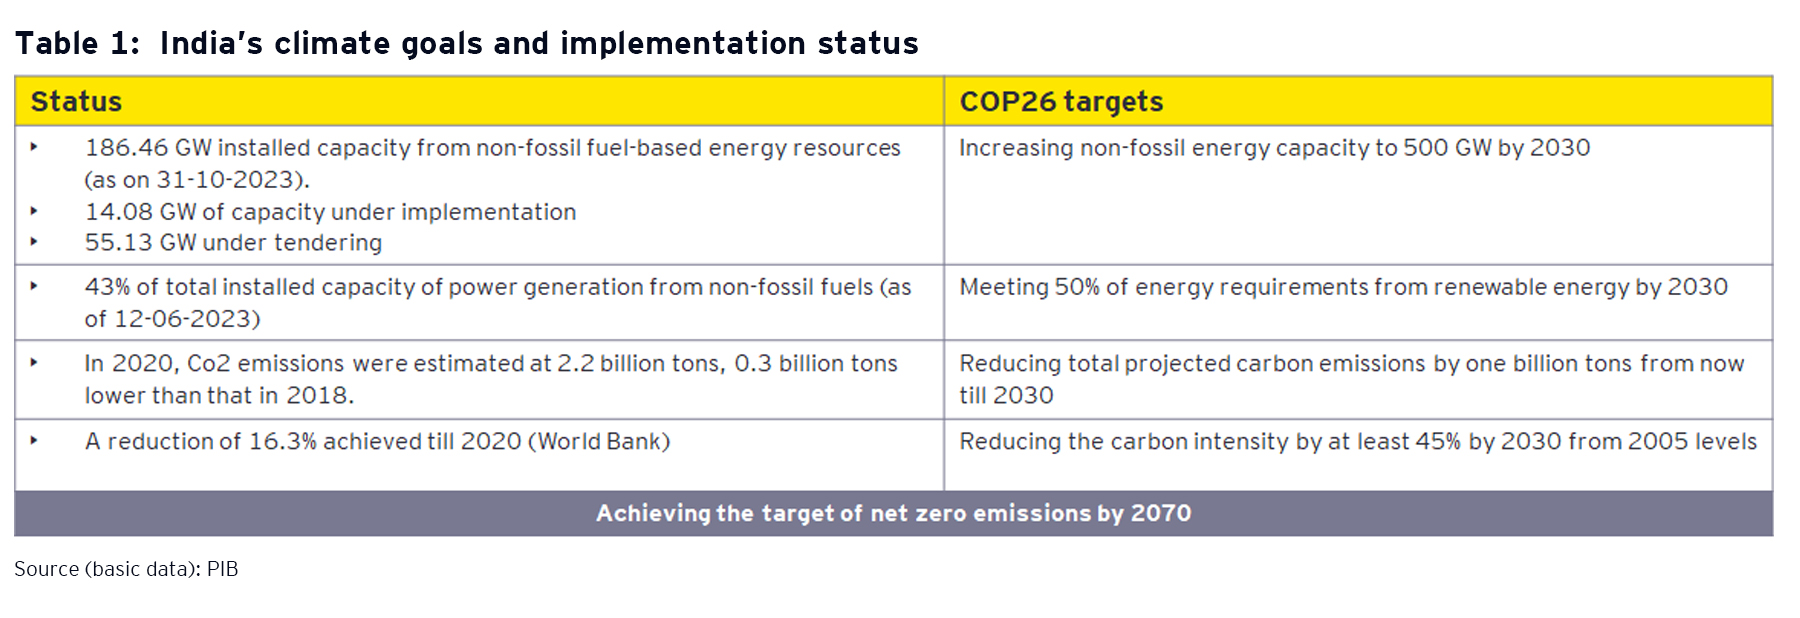 India’s climate goals and implementation status